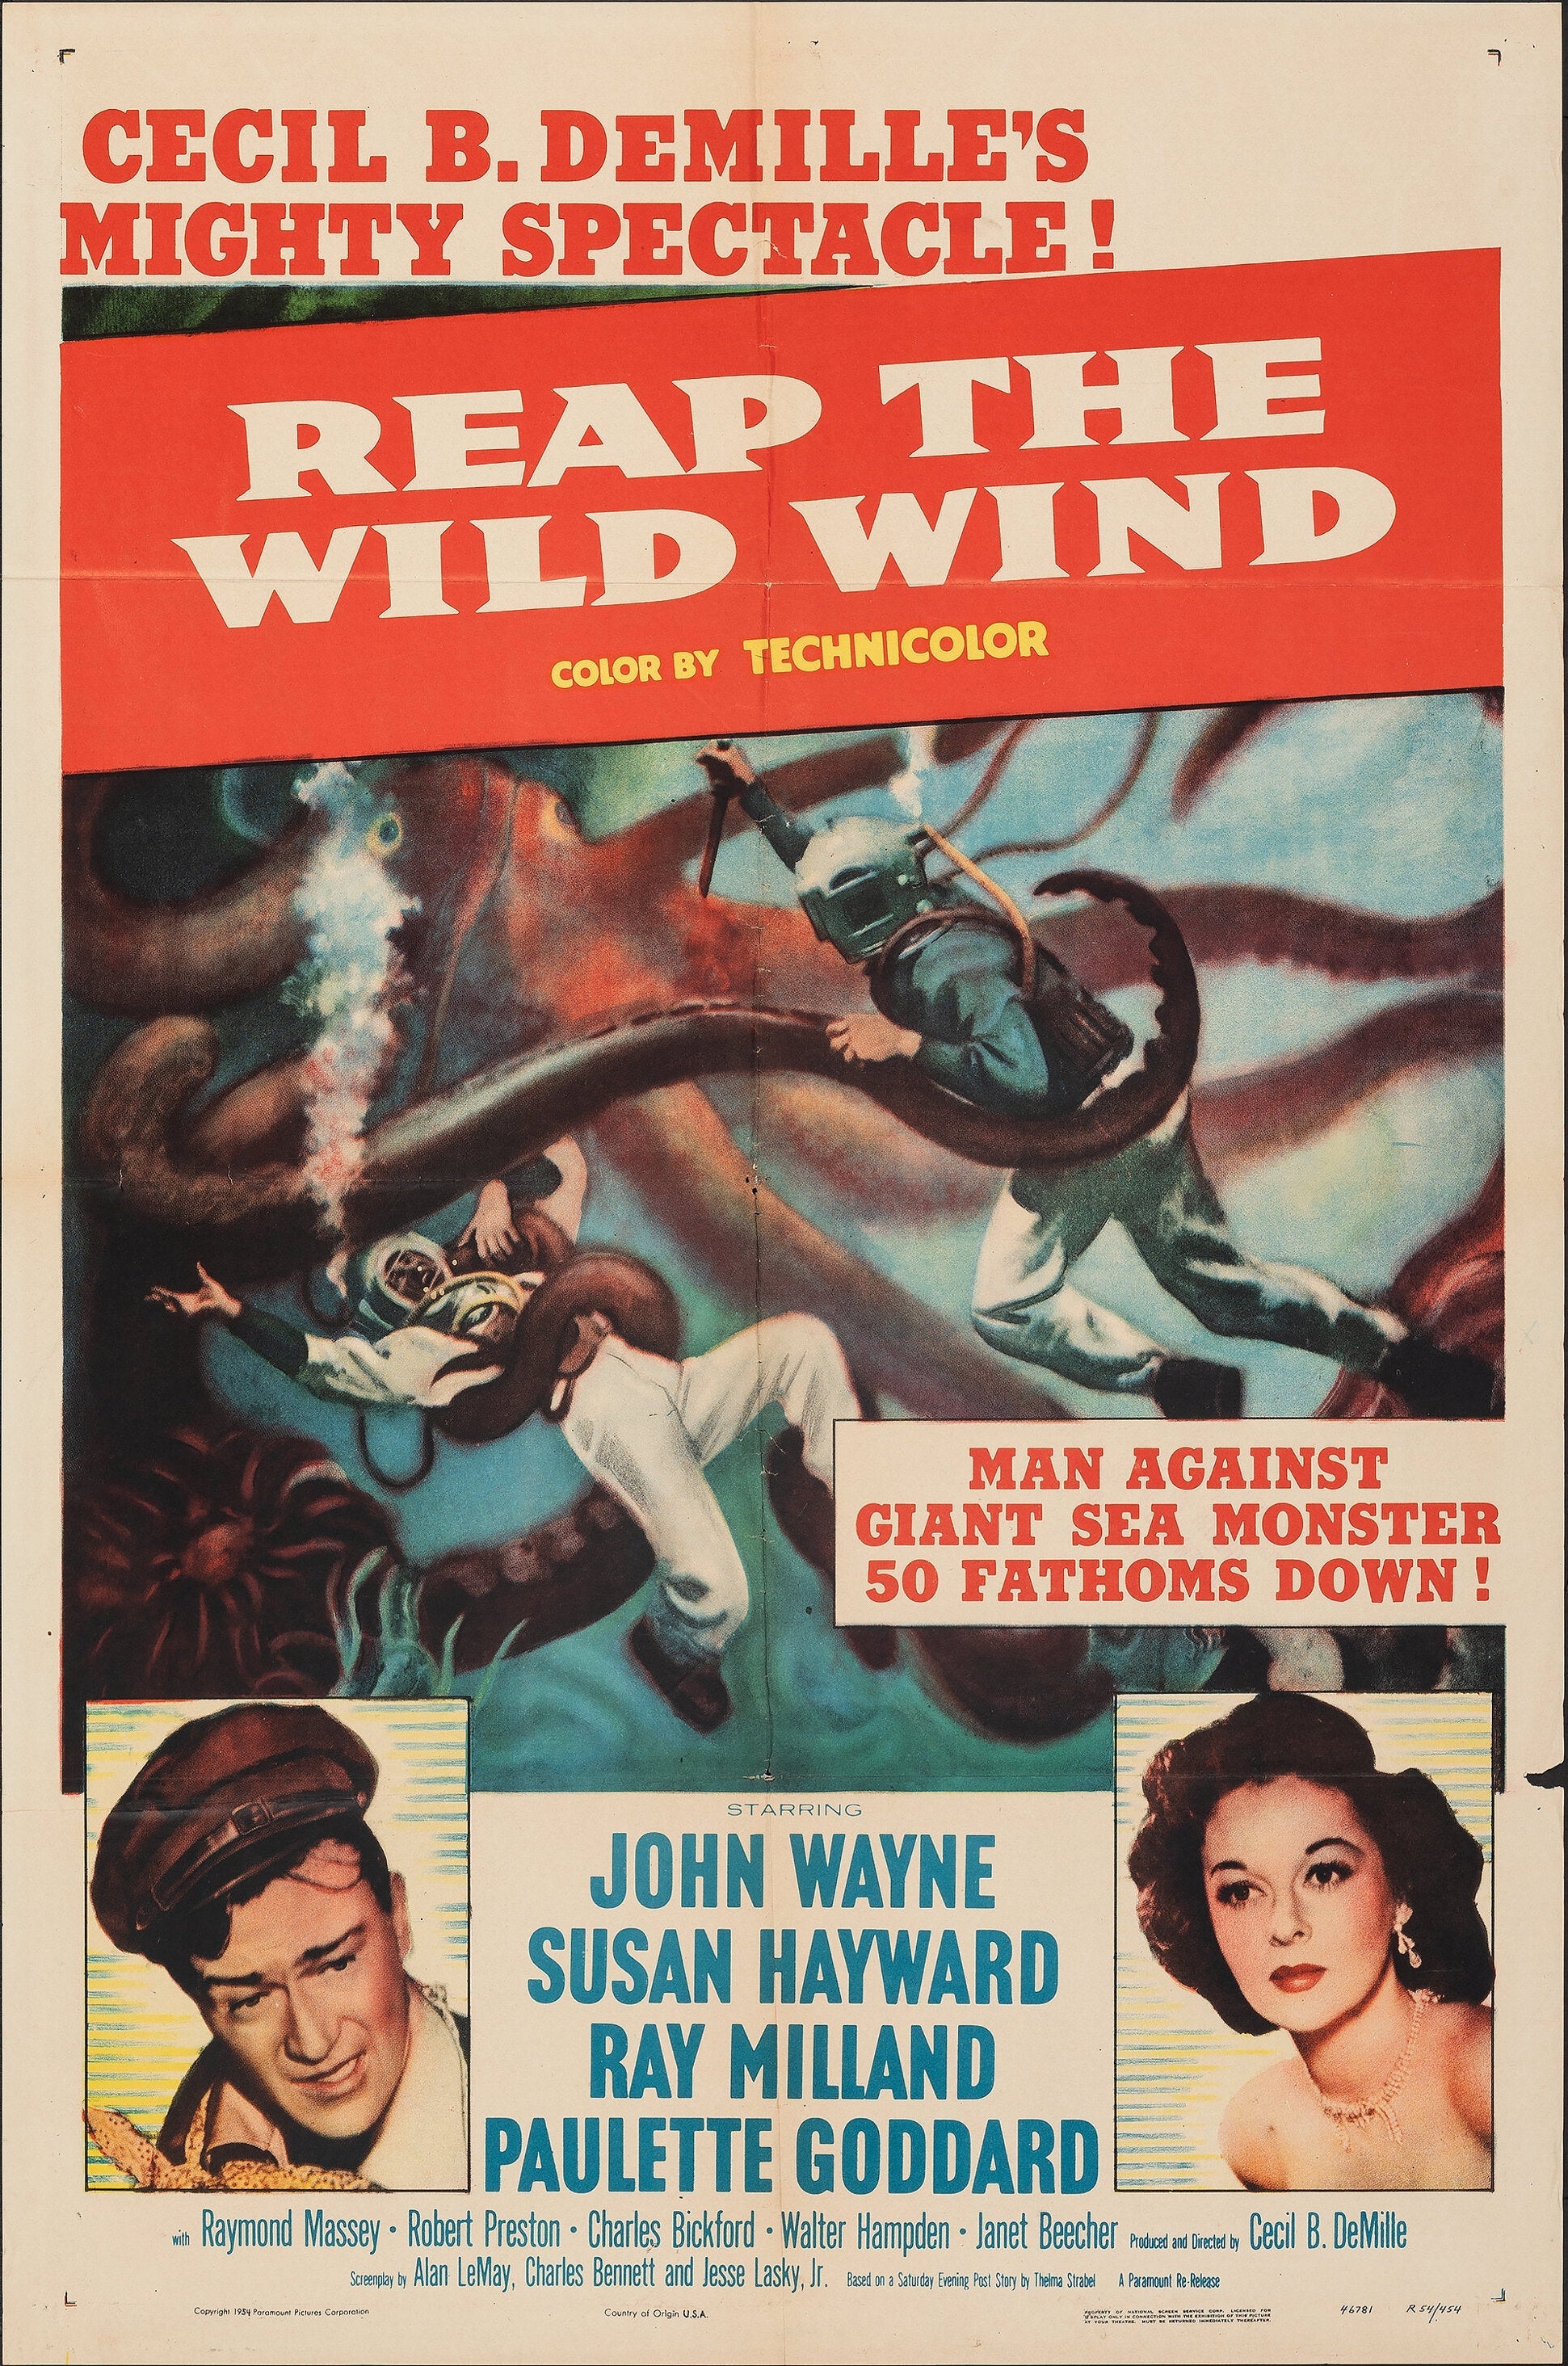 Reap the Wild Wind – Cecil B. DeMille